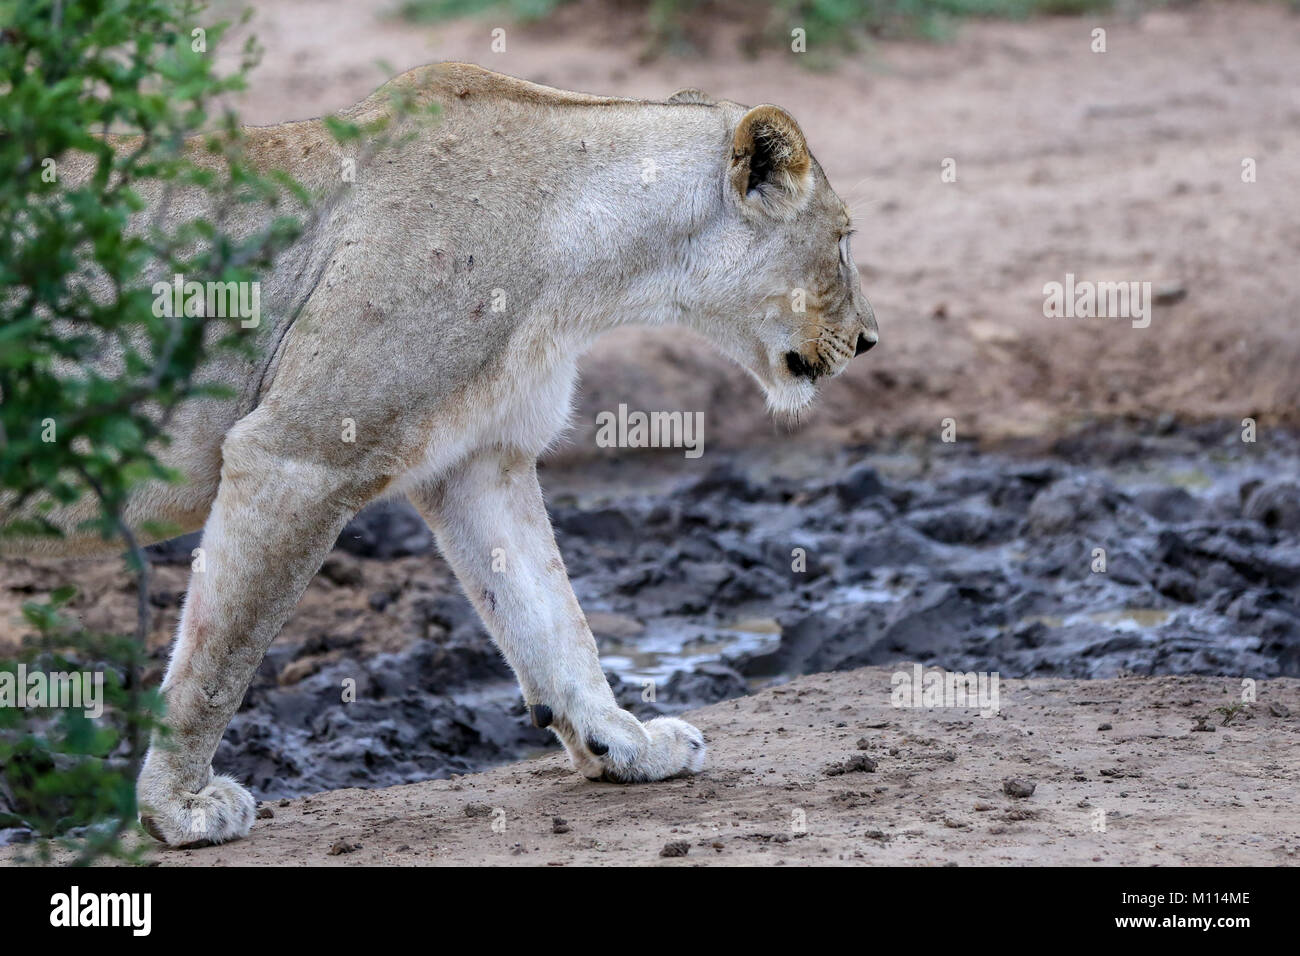 Adult lioness prowling around dried up muddy watering hole Stock Photo